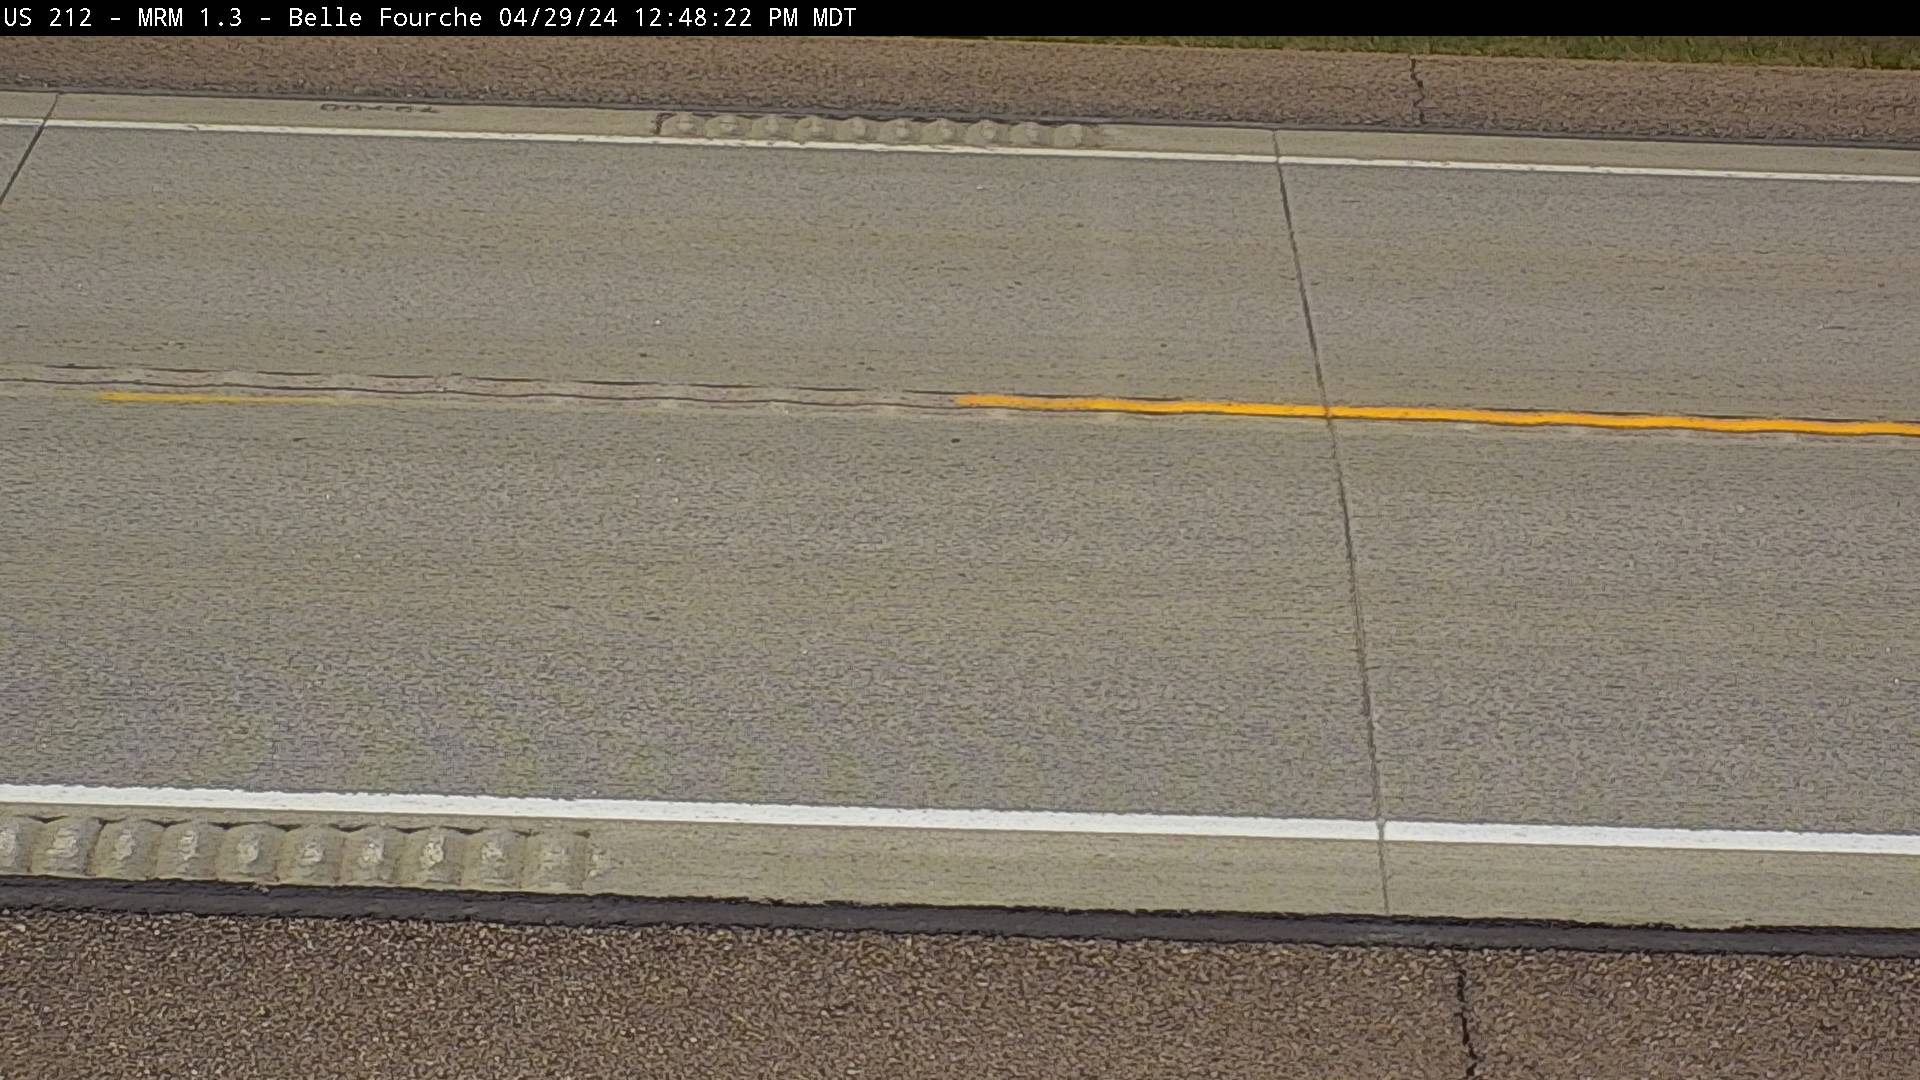 Traffic Cam Northwest of town along US-212 @ MP 1.3 - South Player